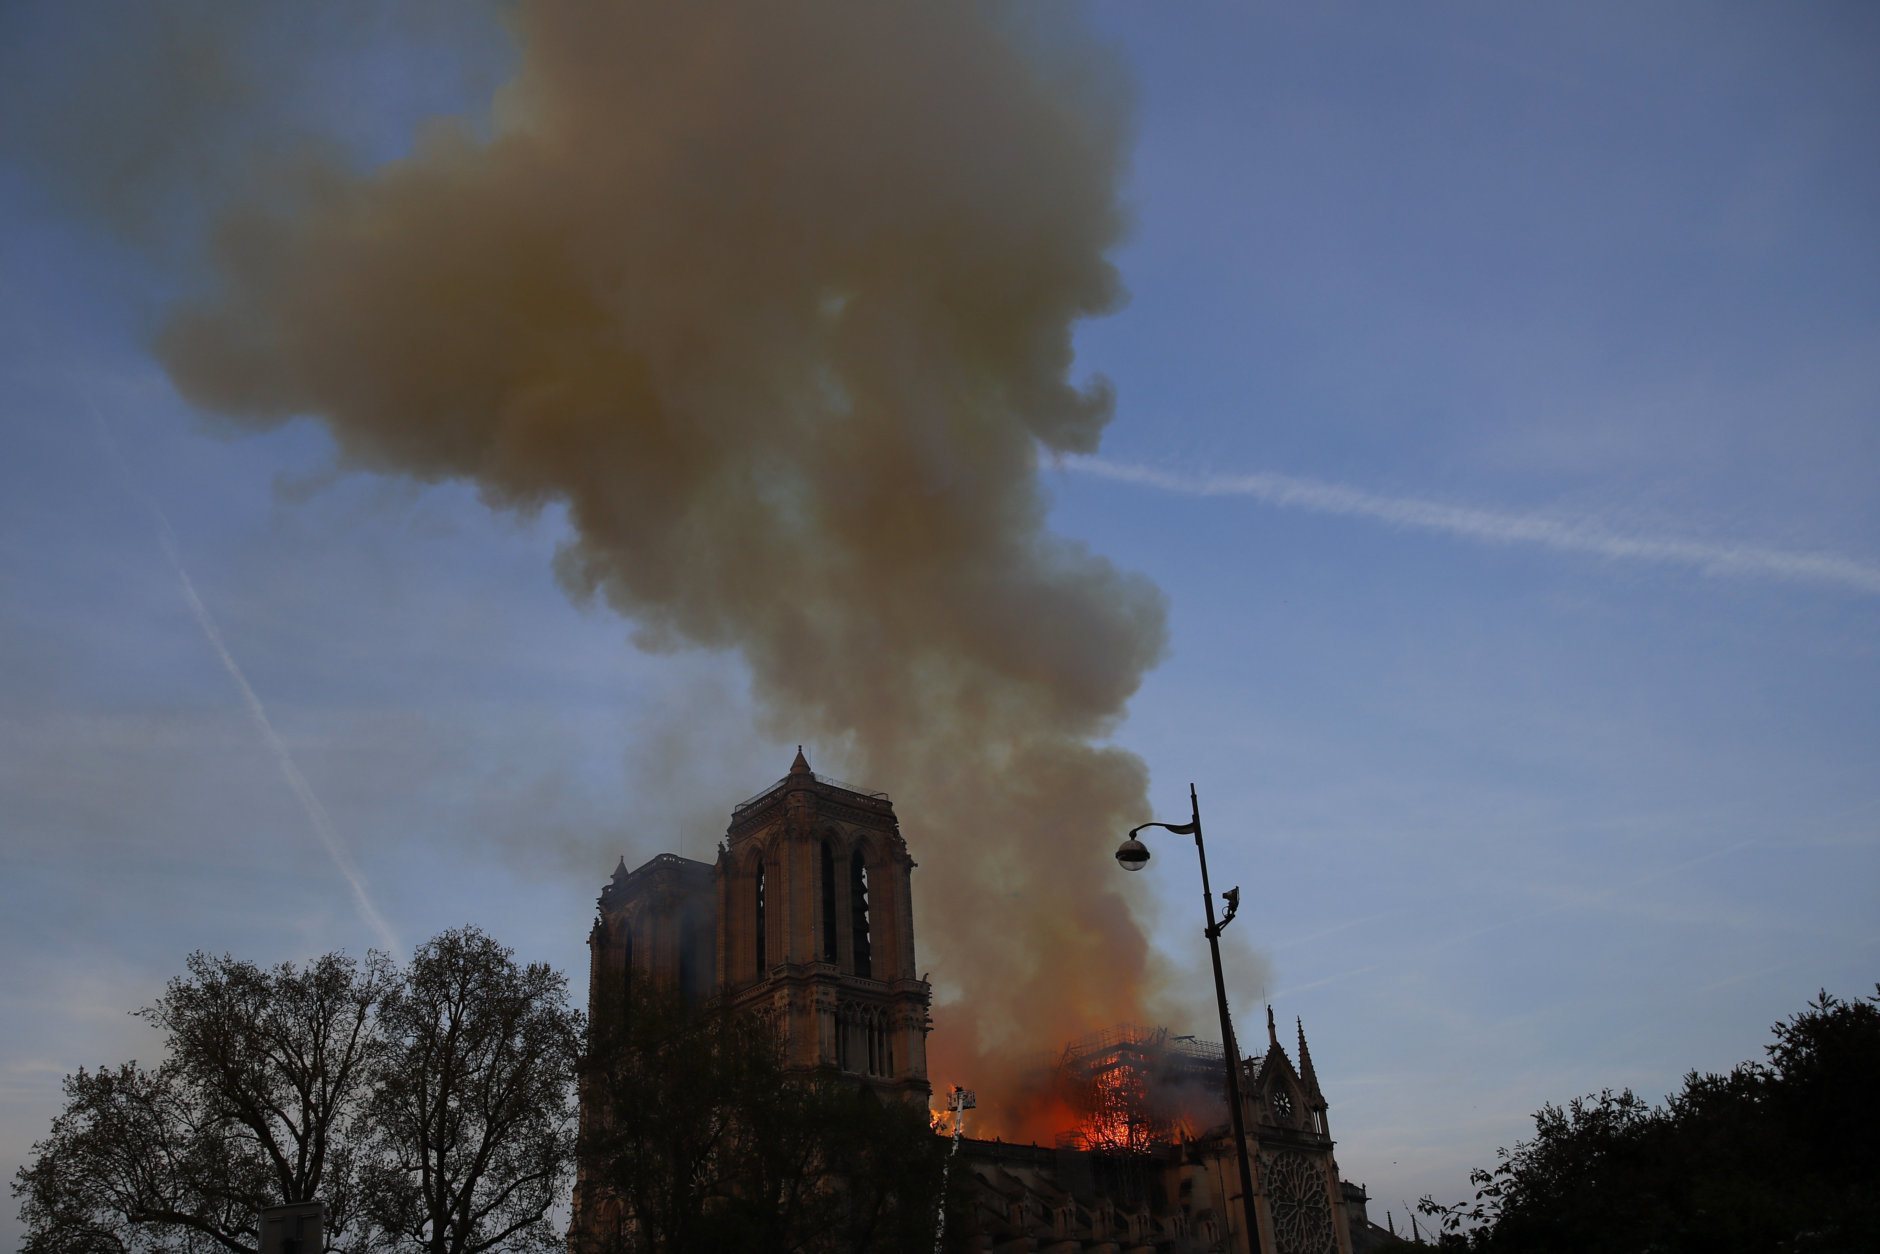 Notre Dame cathedral is burning in Paris, Monday, April 15, 2019. A catastrophic fire engulfed the upper reaches of Paris' soaring Notre Dame Cathedral as it was undergoing renovations Monday, threatening one of the greatest architectural treasures of the Western world as tourists and Parisians looked on aghast from the streets below. (AP Photo/Francois Mori)